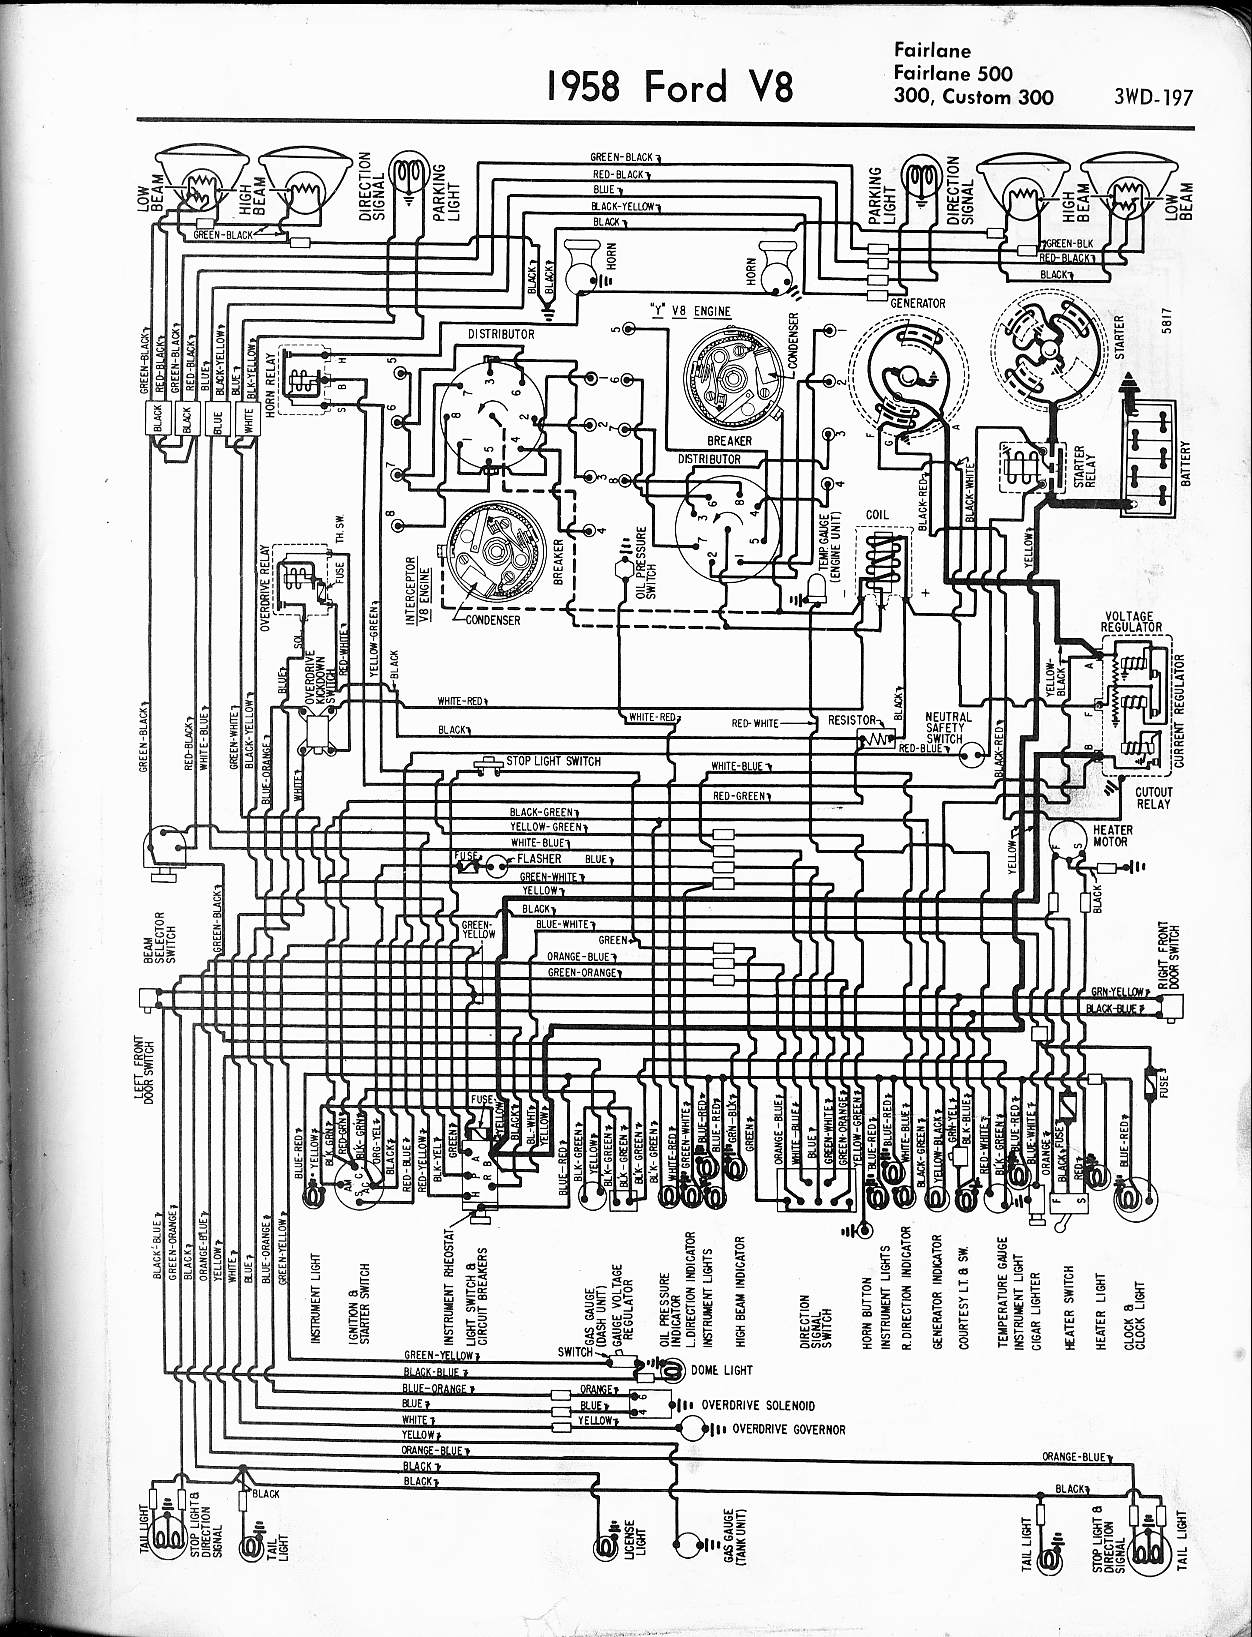 Wiring diagram for 1966 ford pickup #7